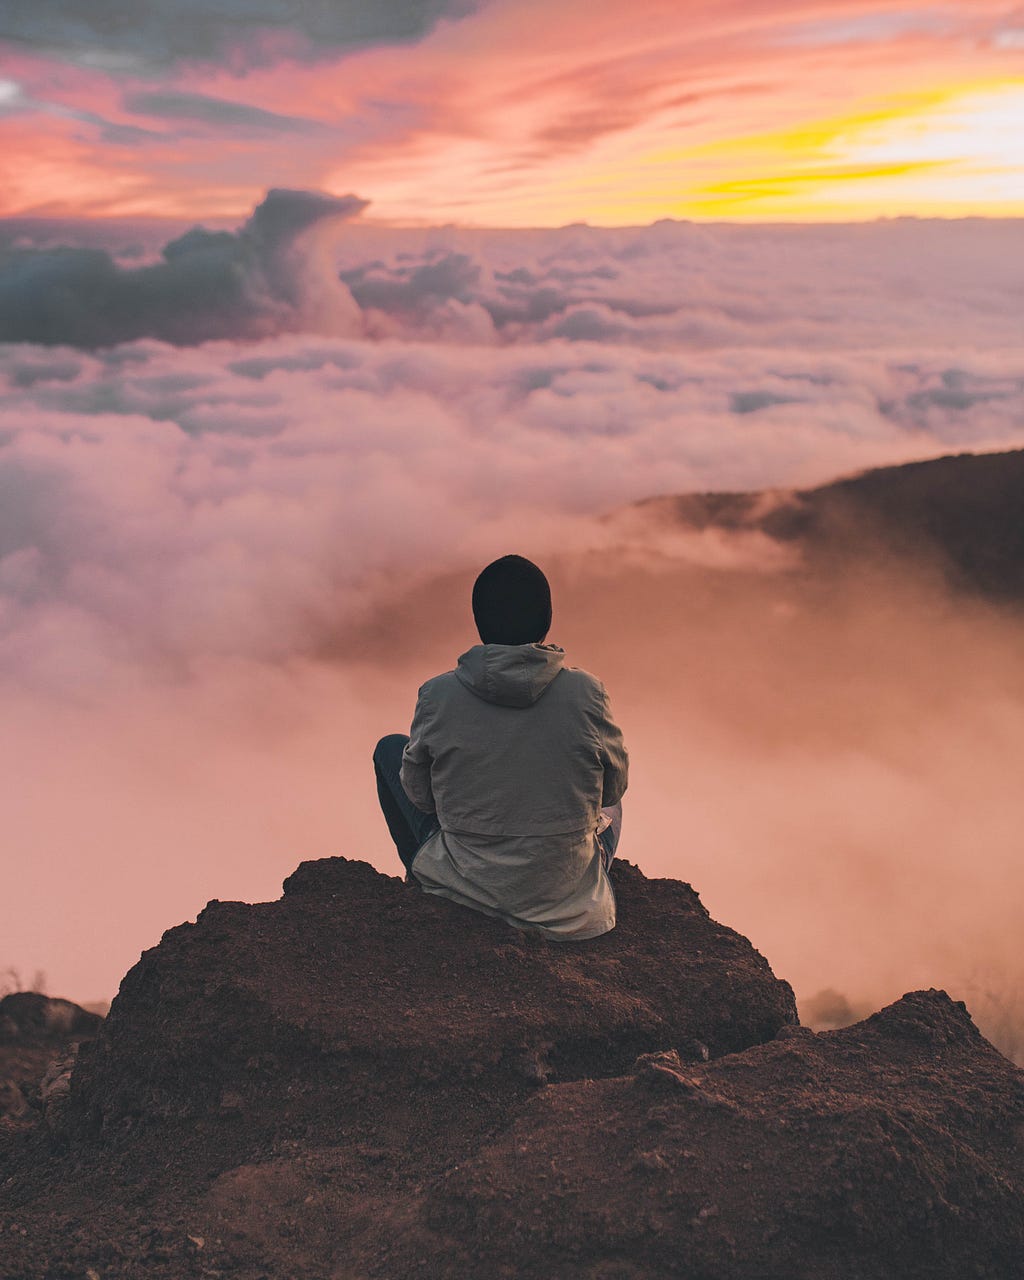 A man sitting on a mountain peak and staring at the clouds at sunset